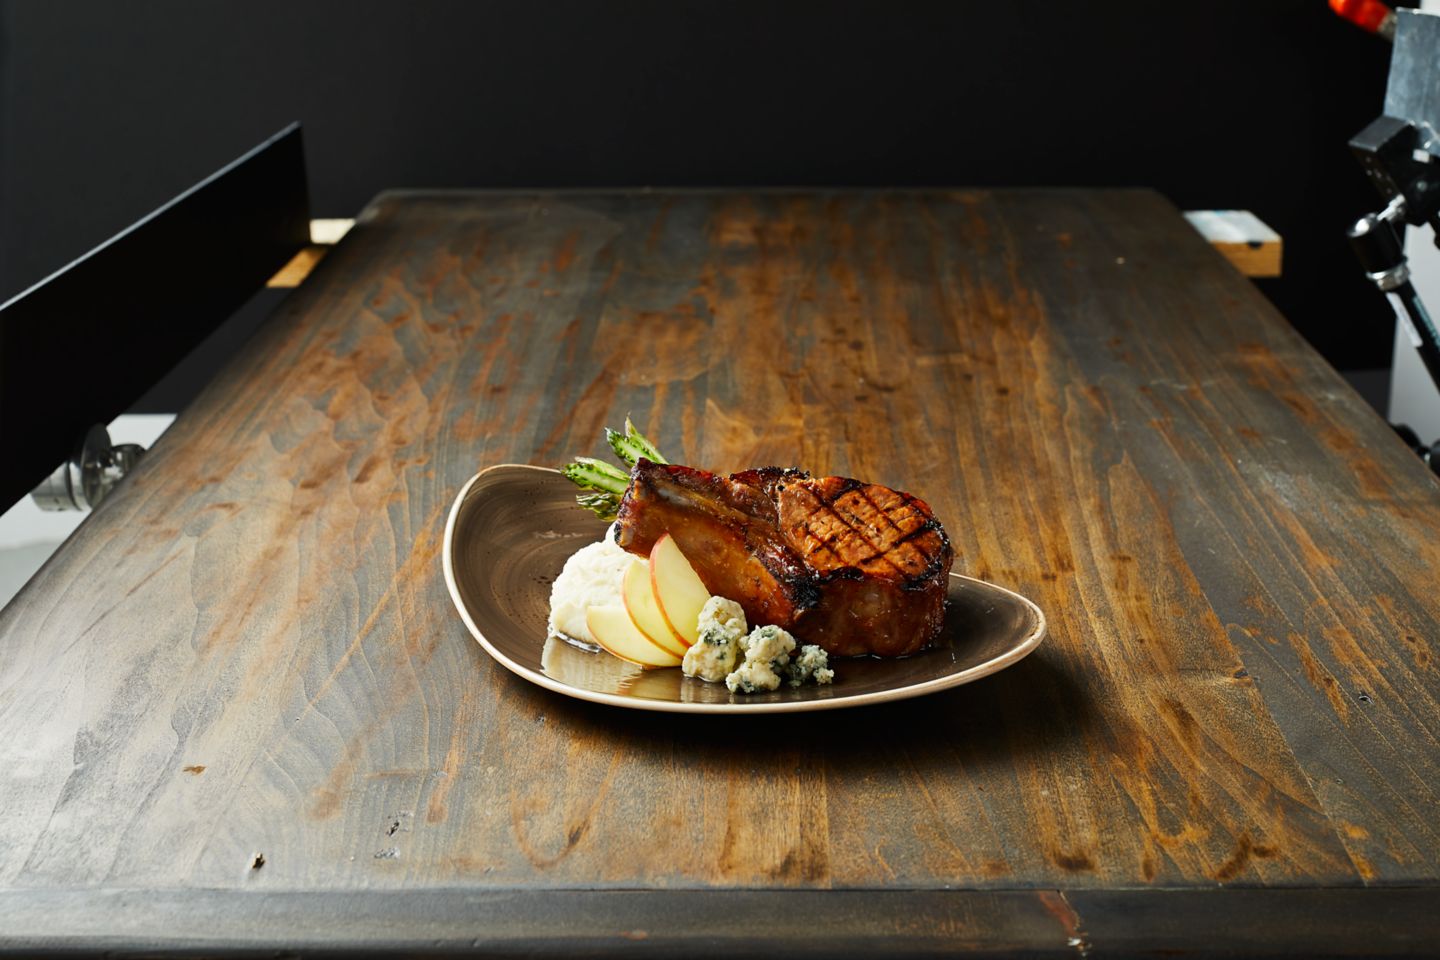 a pork-chop on a plate sitting on a wooden table